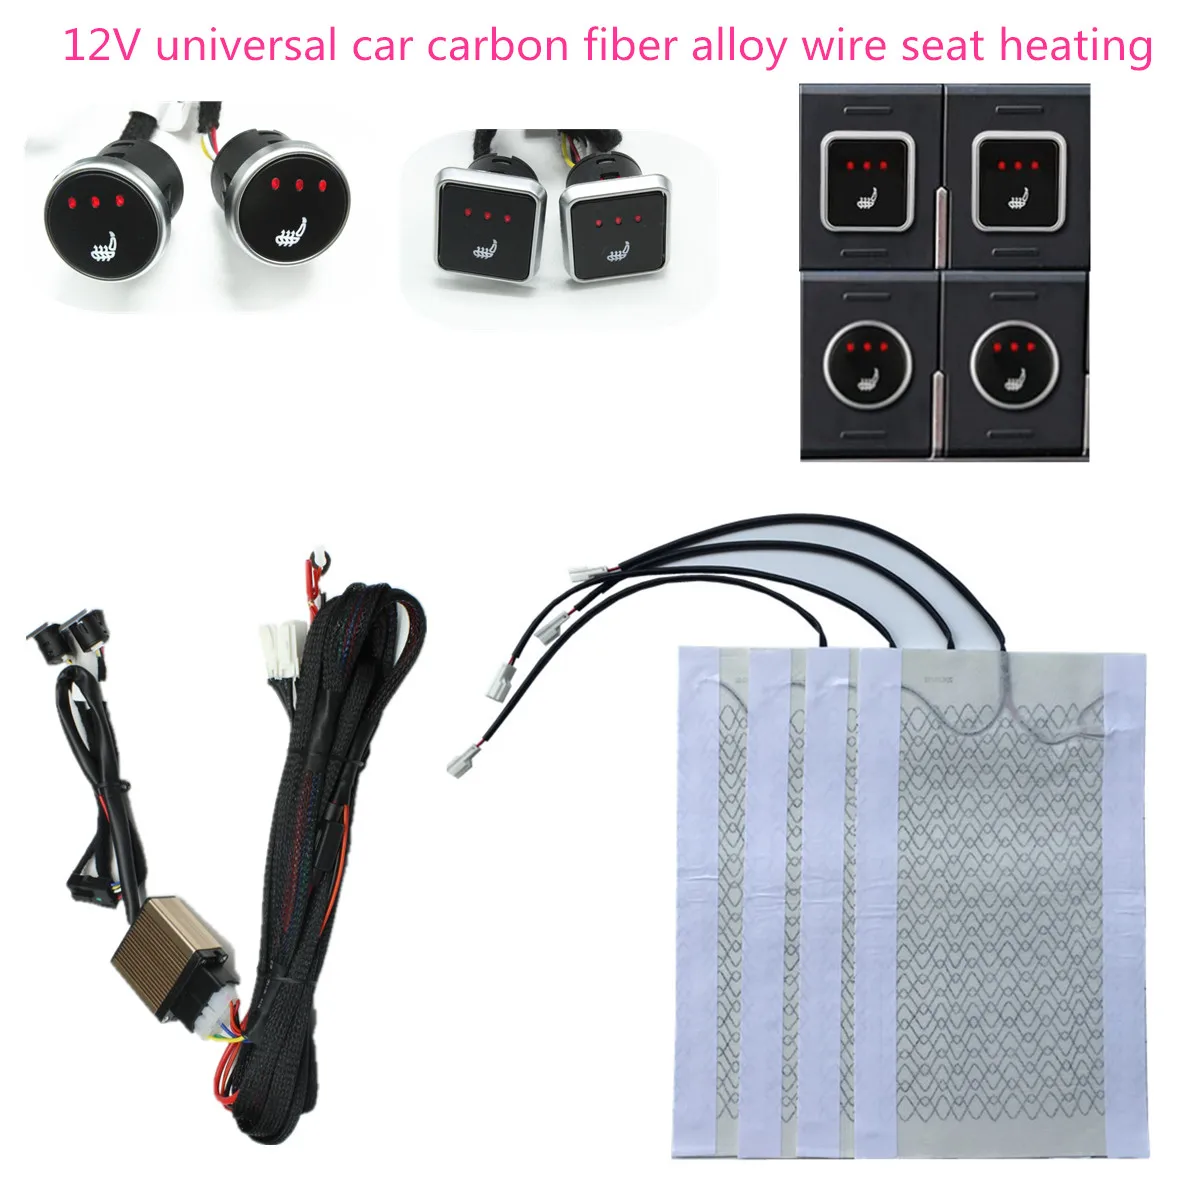 Car Seat Heater Universal 12V Carbon Fiber Alloy Wire Car Seat Heat Pads... - $60.80+